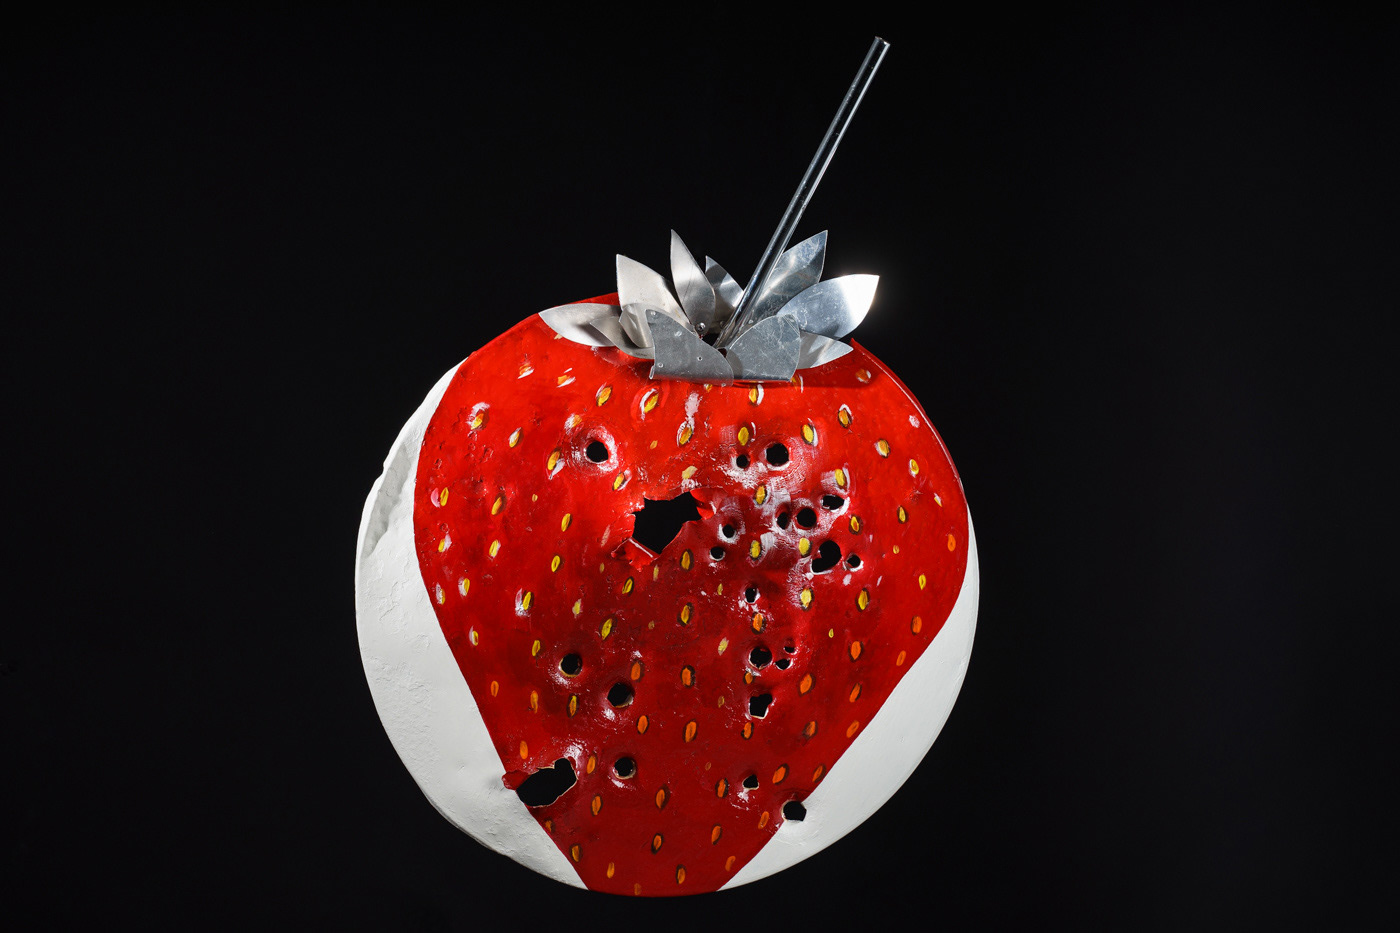 Strawberry front view